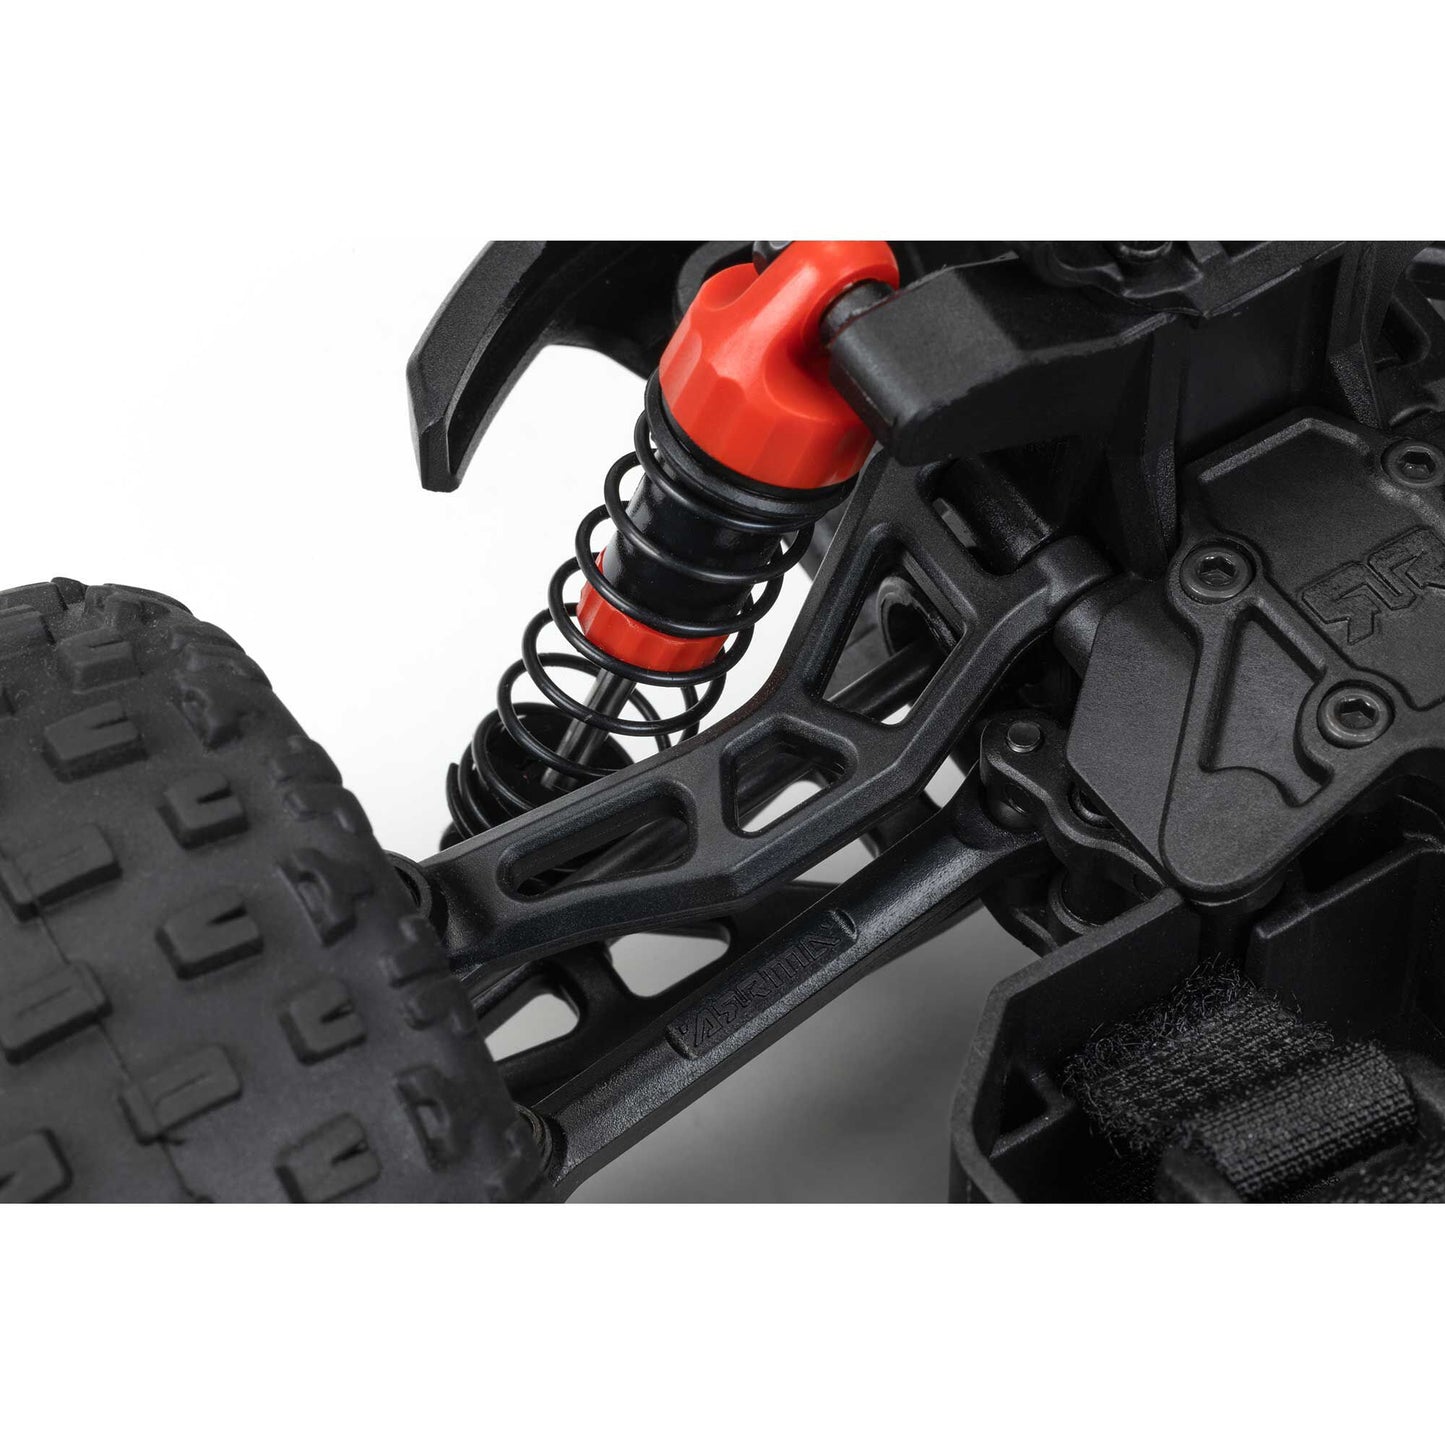 Arrma Granite Grom   4x4 Small Scale MT, Red